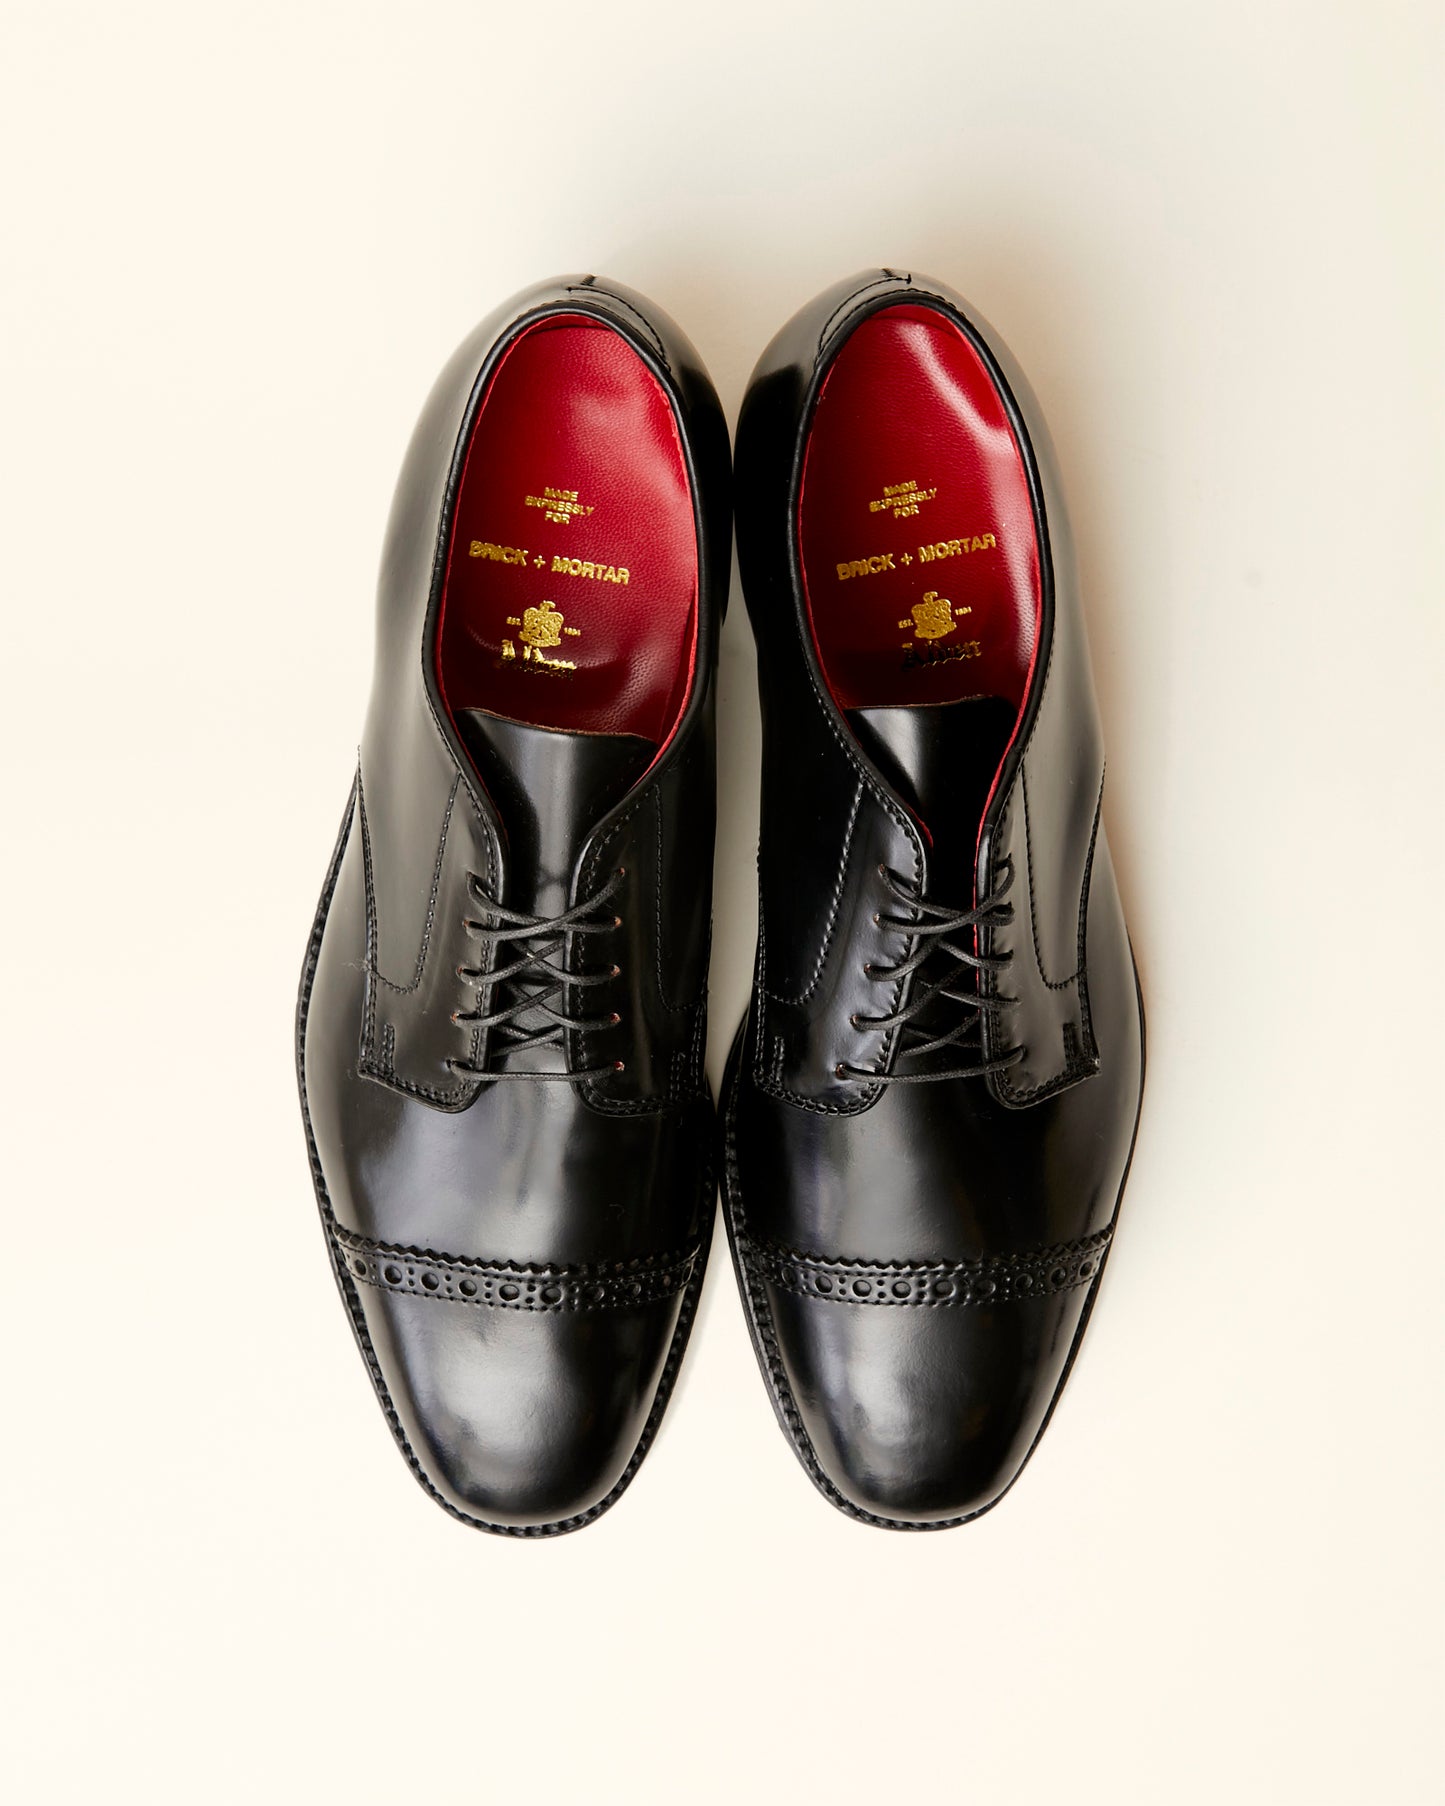 "Executive" Unlined Perforated Tip Blucher in Black Shell Cordovan, Plaza Last